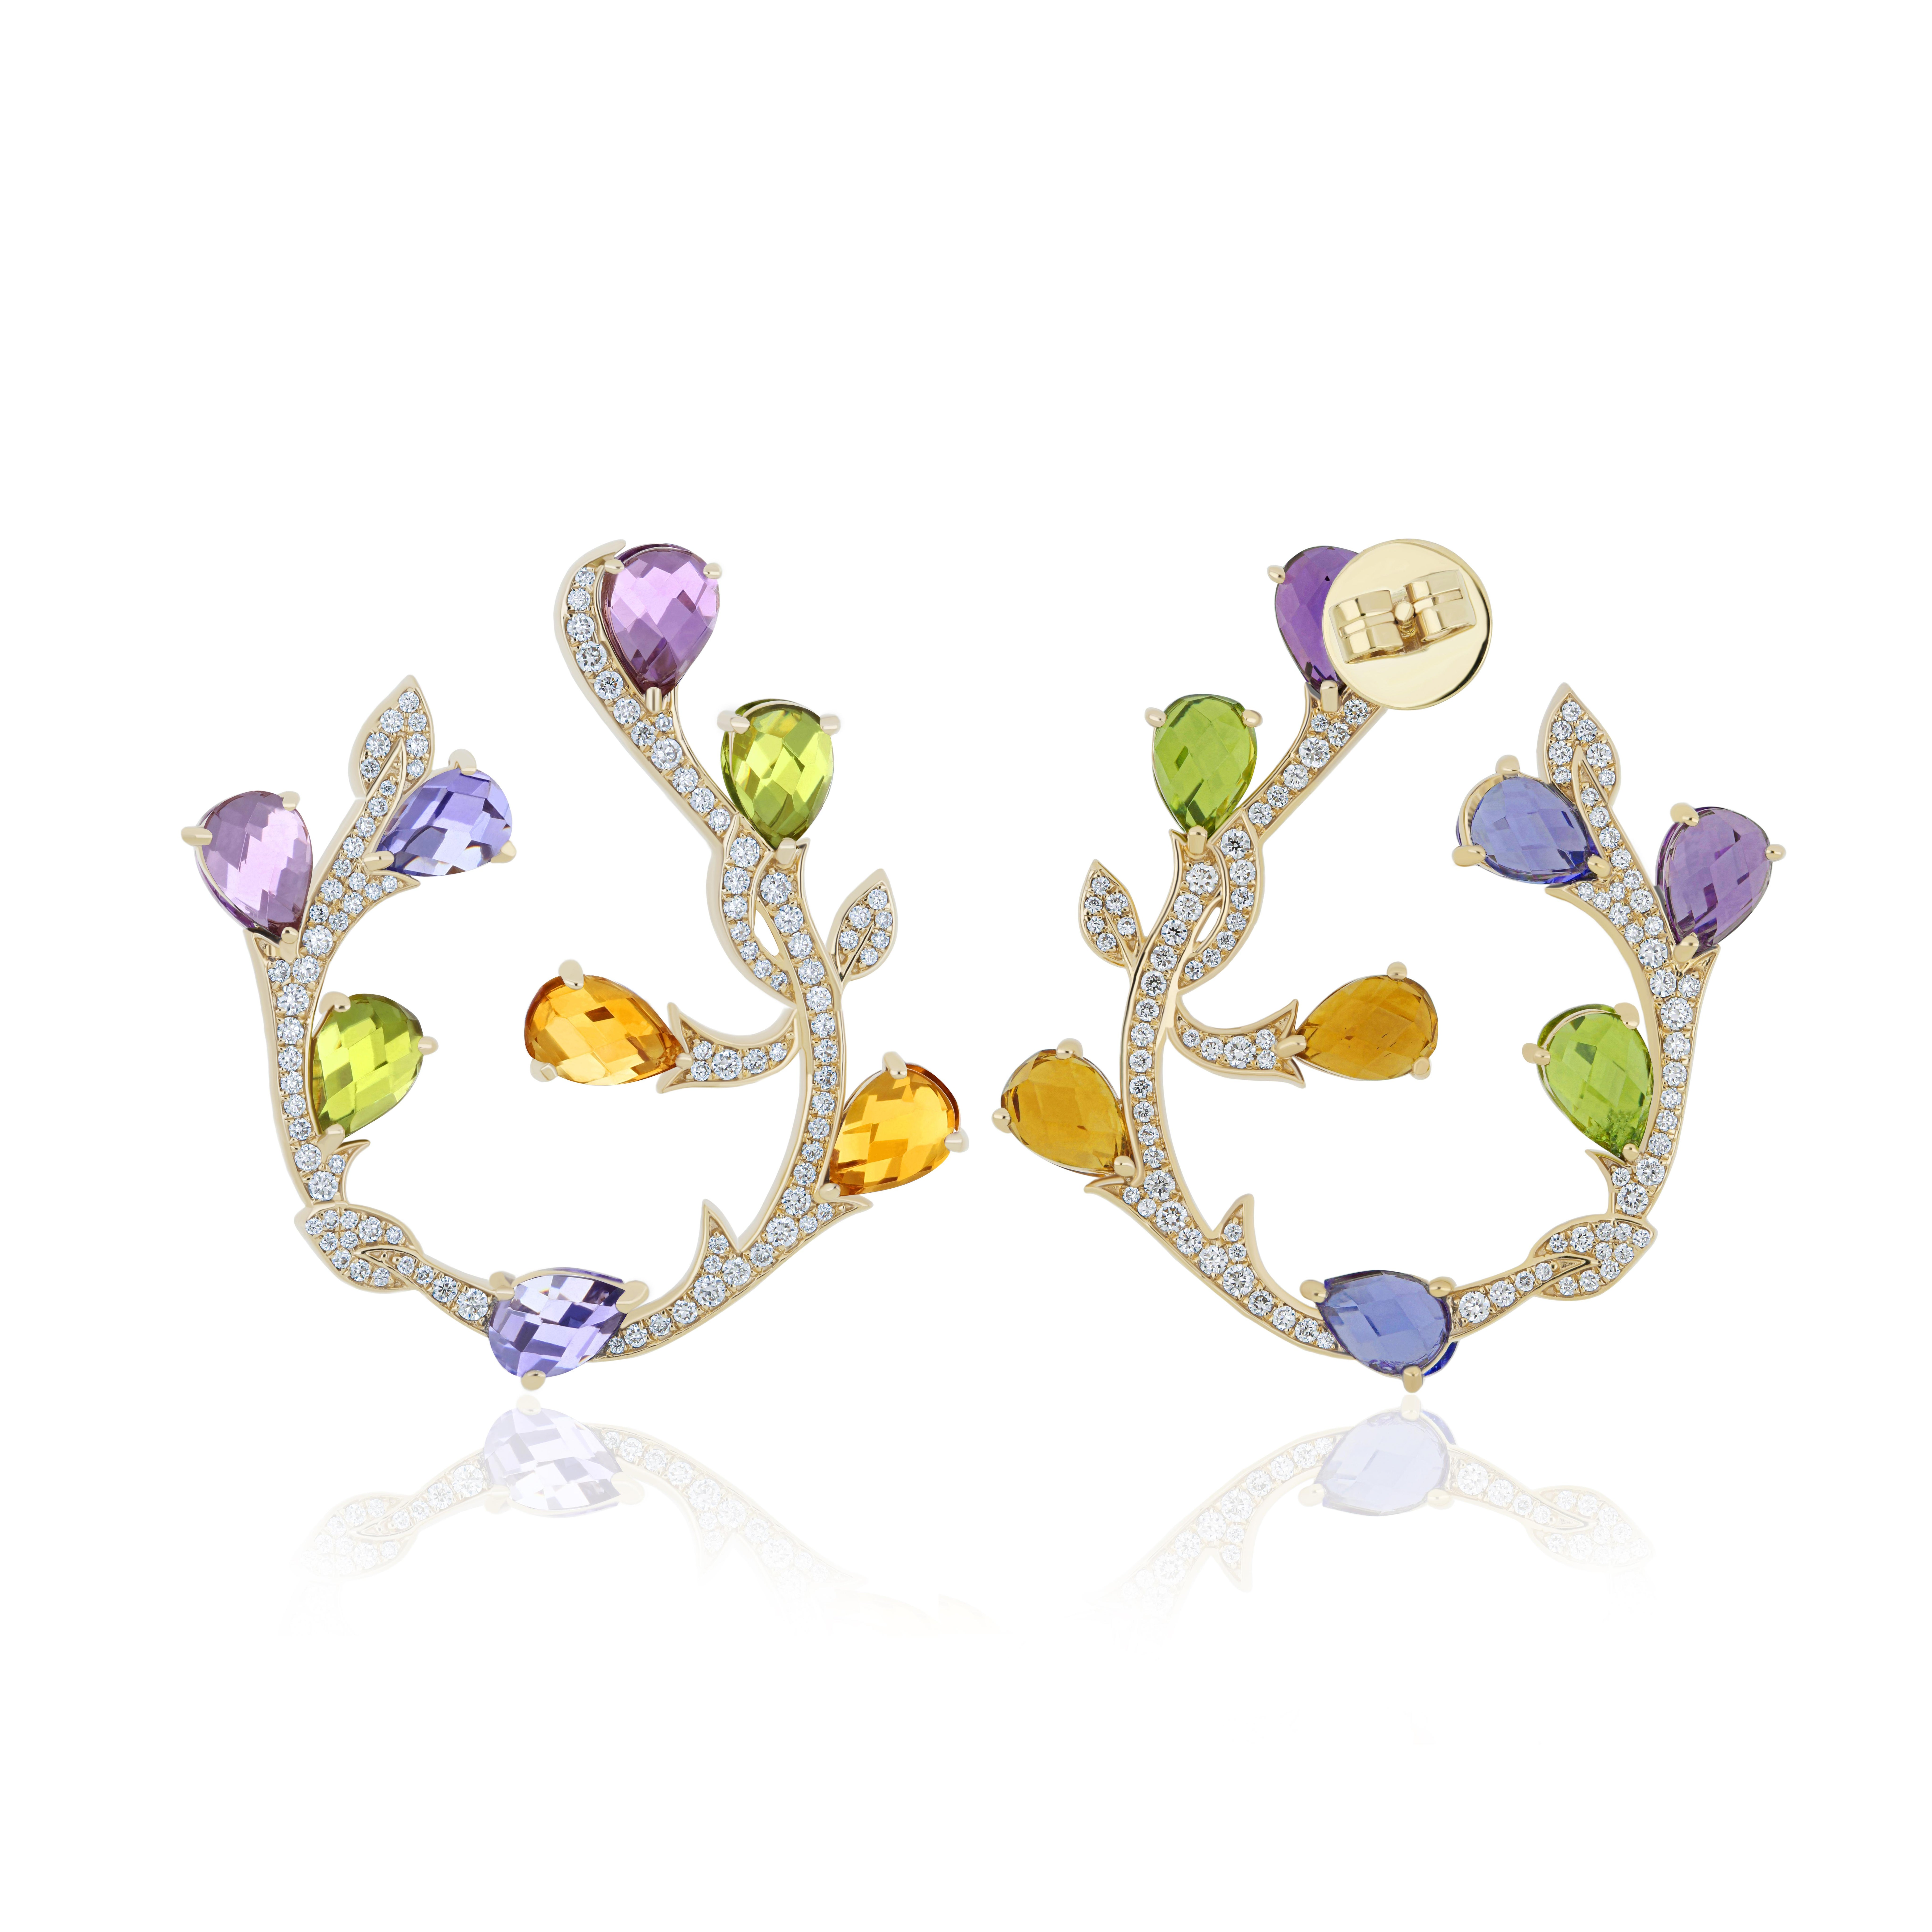 Pear Cut Multi Color Gemstones and Dimaond Studded Earrings in 14K Yellow Gold For Sale